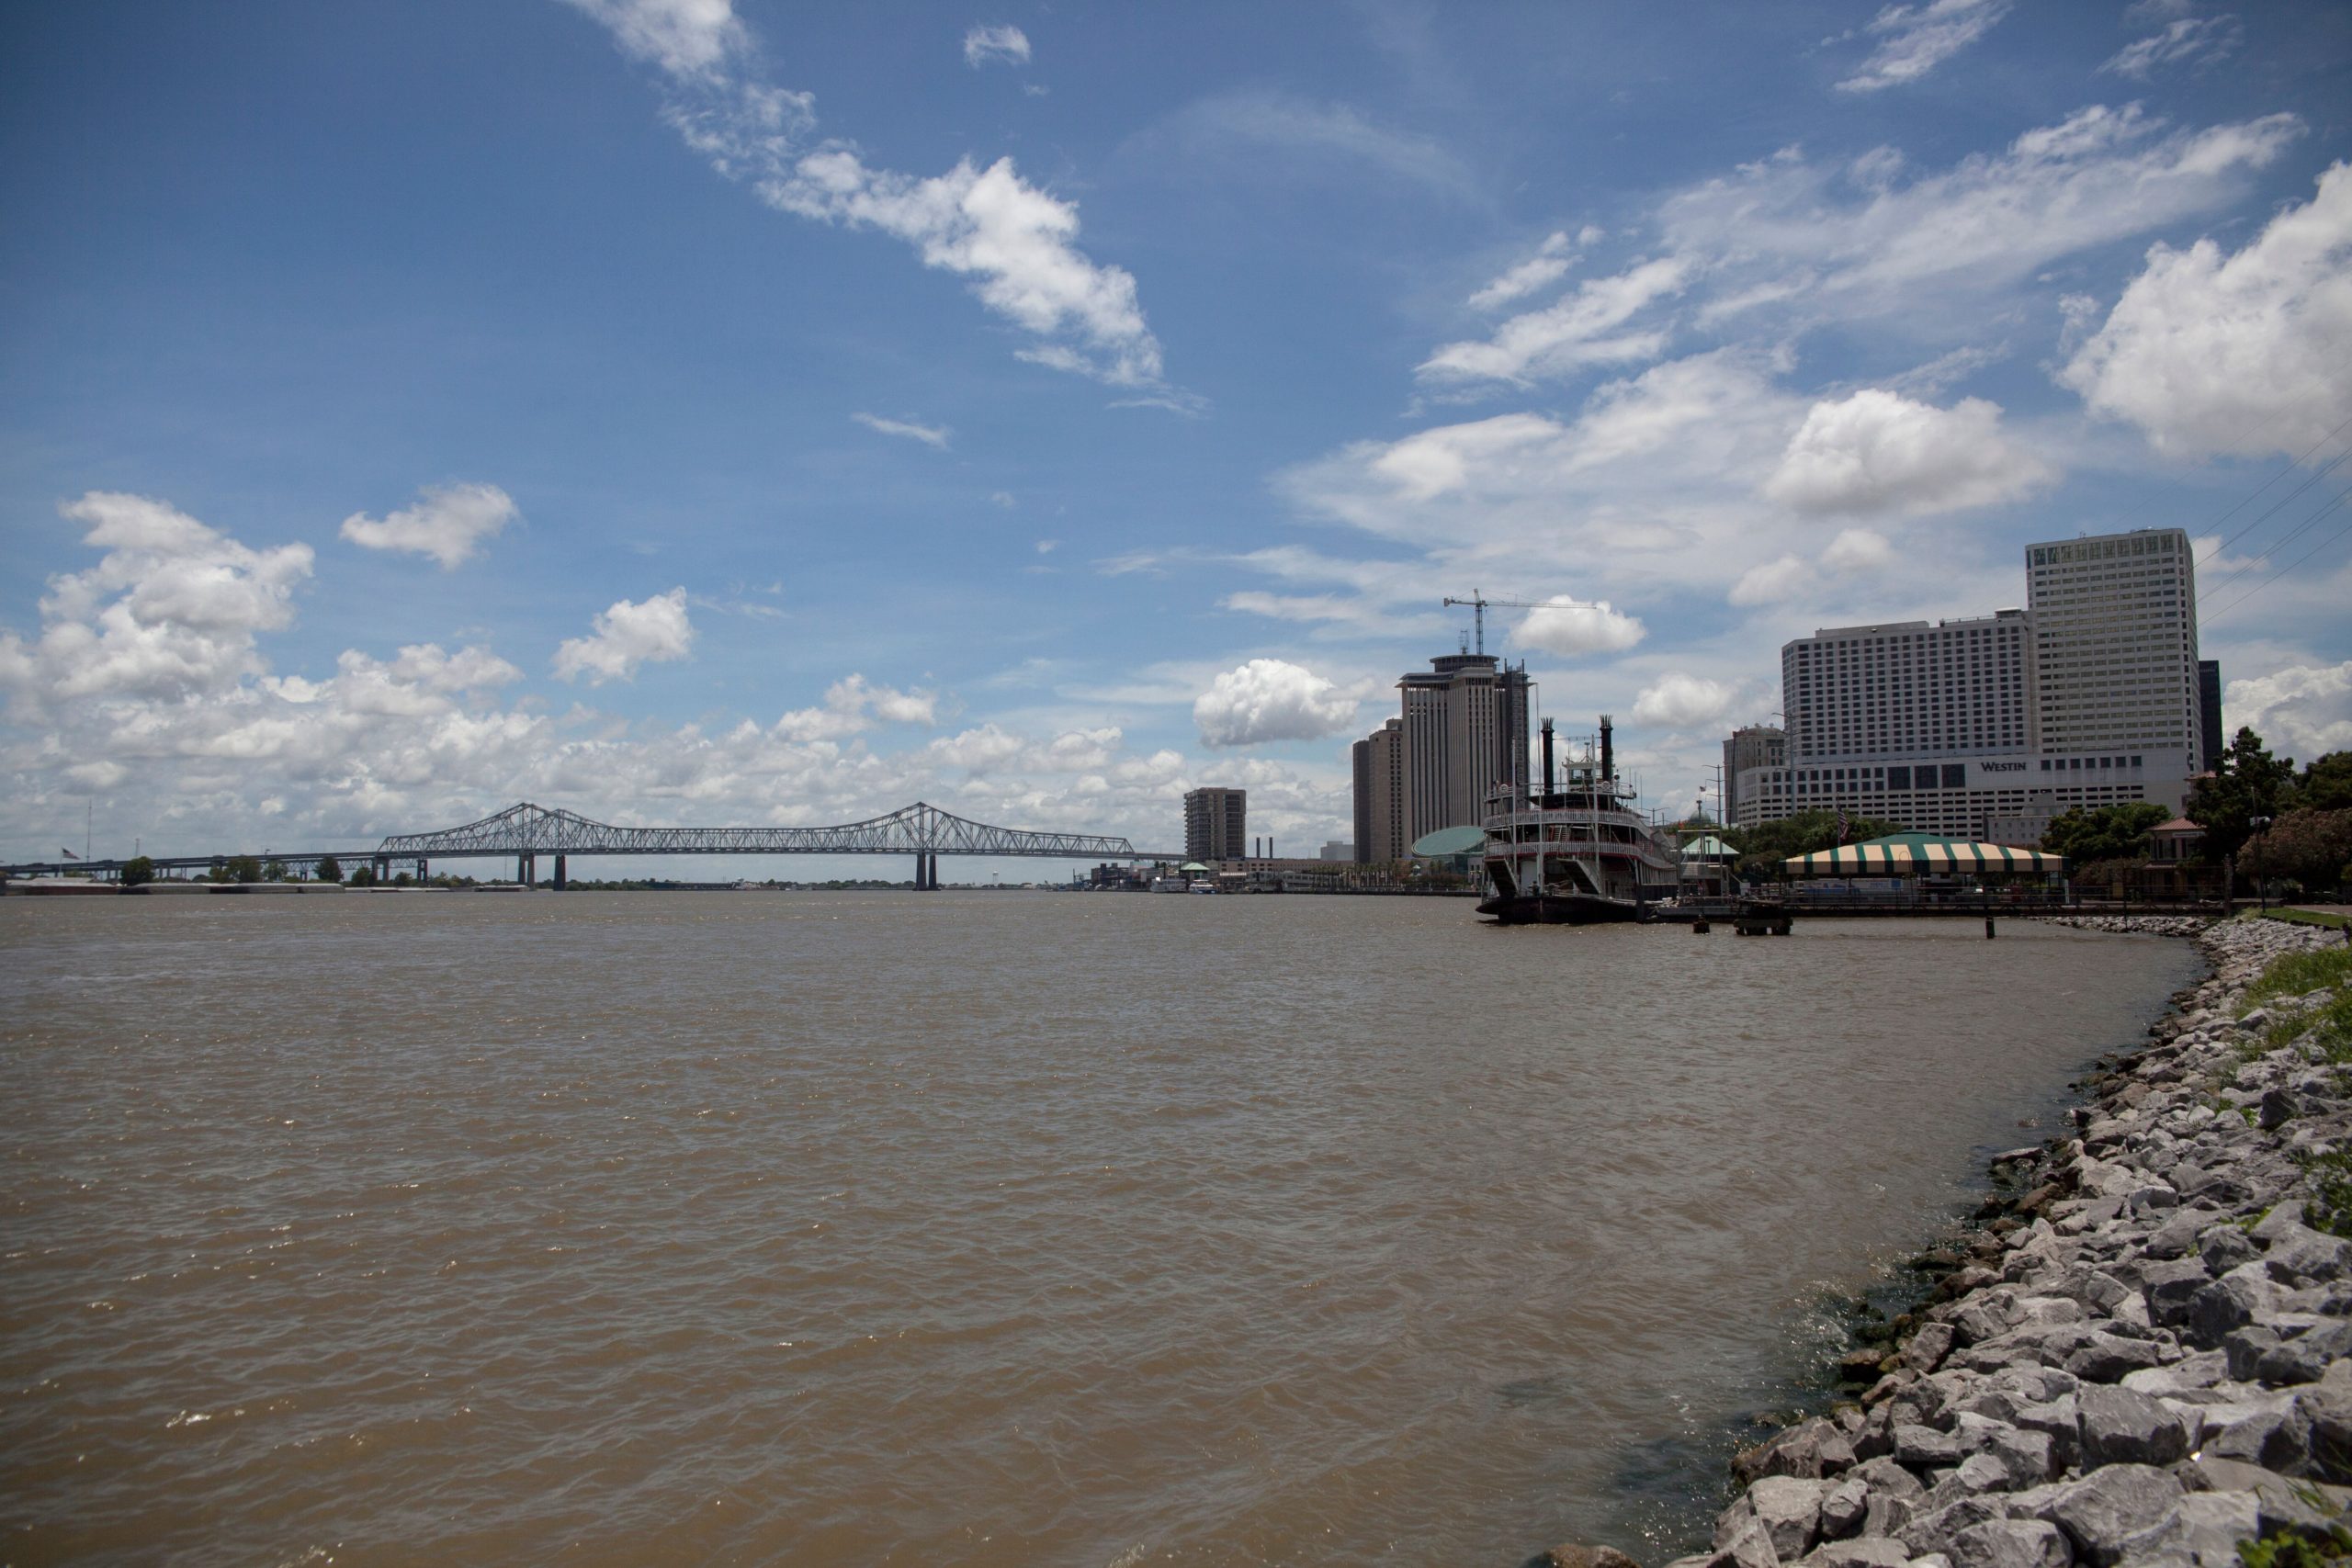 The Mississippi River is seen in New Orleans as tropical storm Barry approaches on July 11, 2019. - Tropical storm Barry barreled toward rain-soaked New Orleans on July 11 as the city hunkered down for an ordeal that evoked fearful memories of 2005's deadly Hurricane Katrina. (Photo by Seth HERALD / AFP)        (Photo credit should read SETH HERALD/AFP/Getty Images)